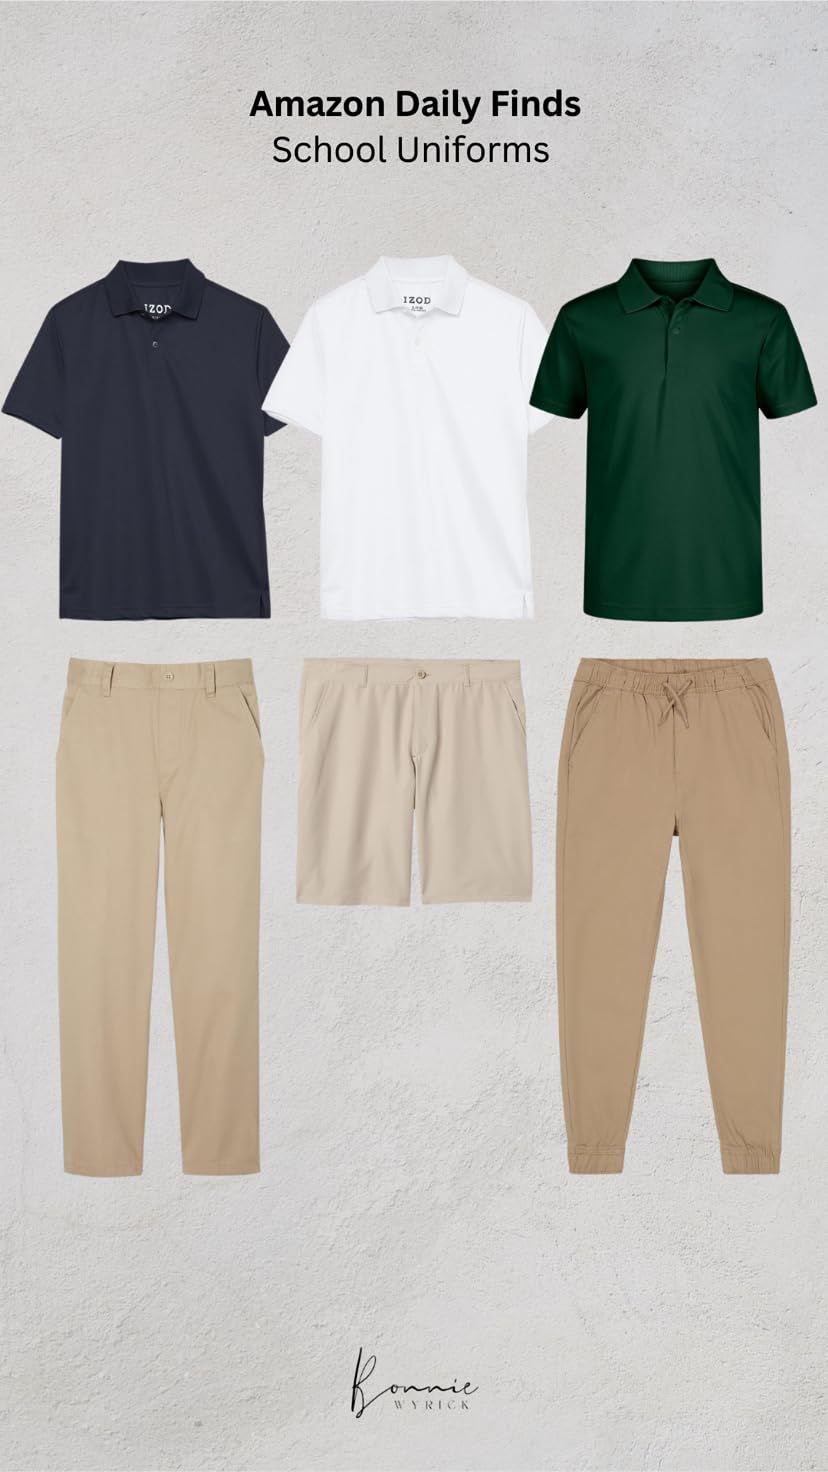 Get back-to-school ready with these affordable school uniforms for boys!